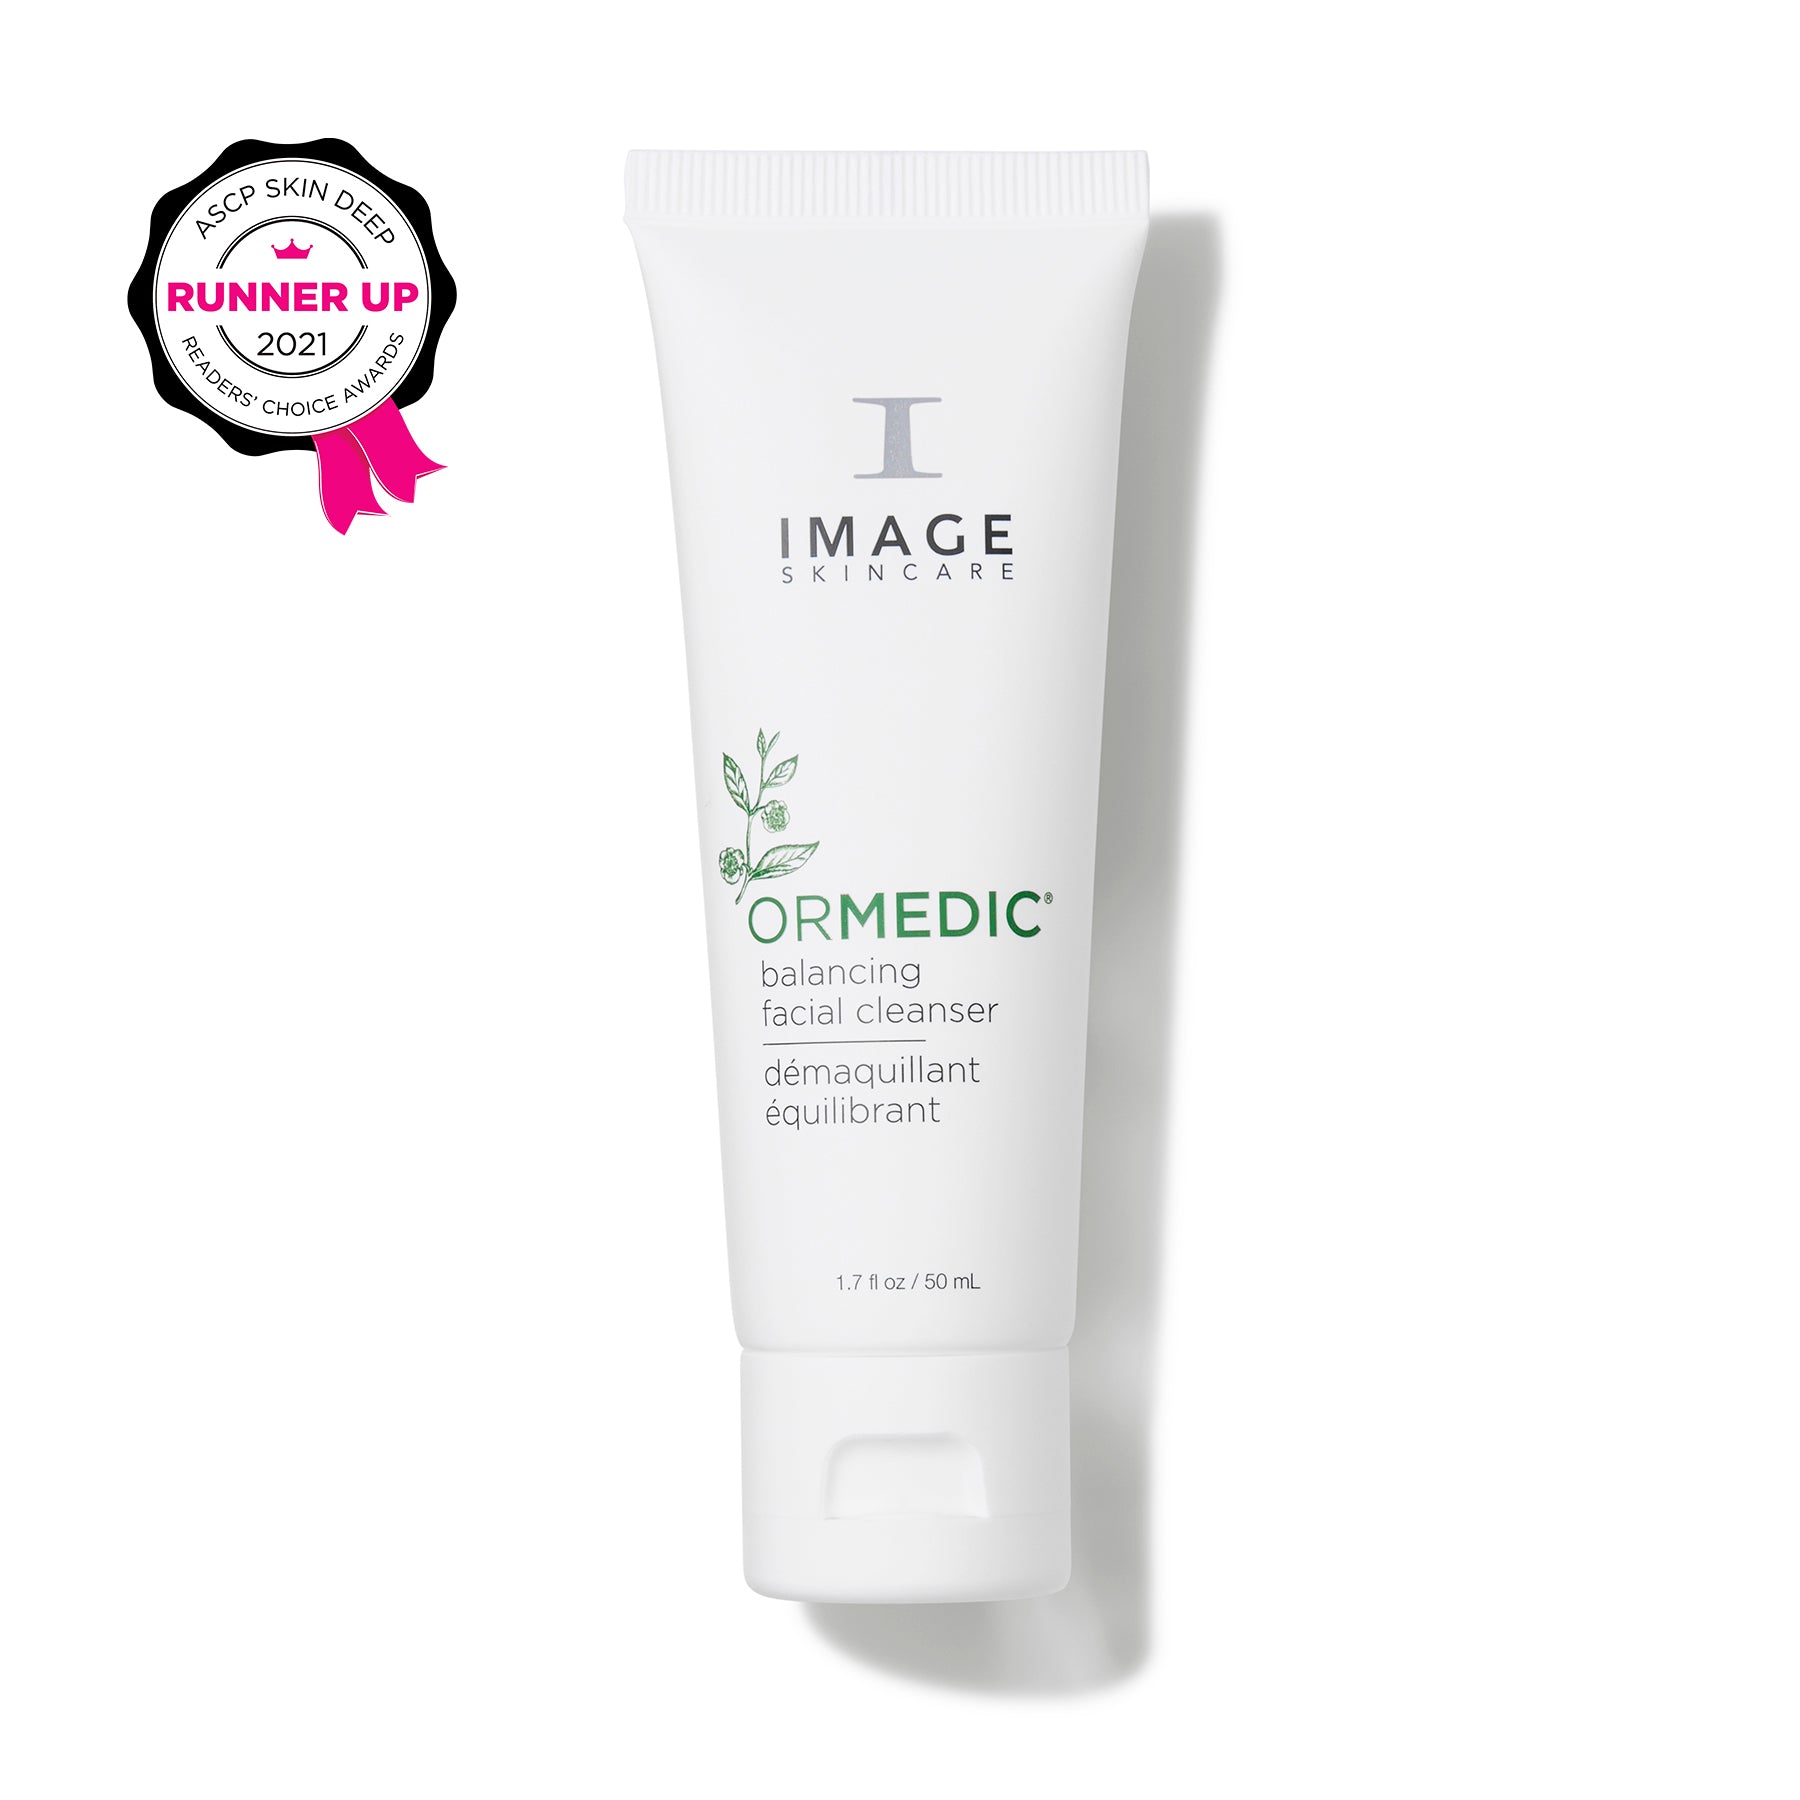 ORMEDIC® balancing facial cleanser discovery-size